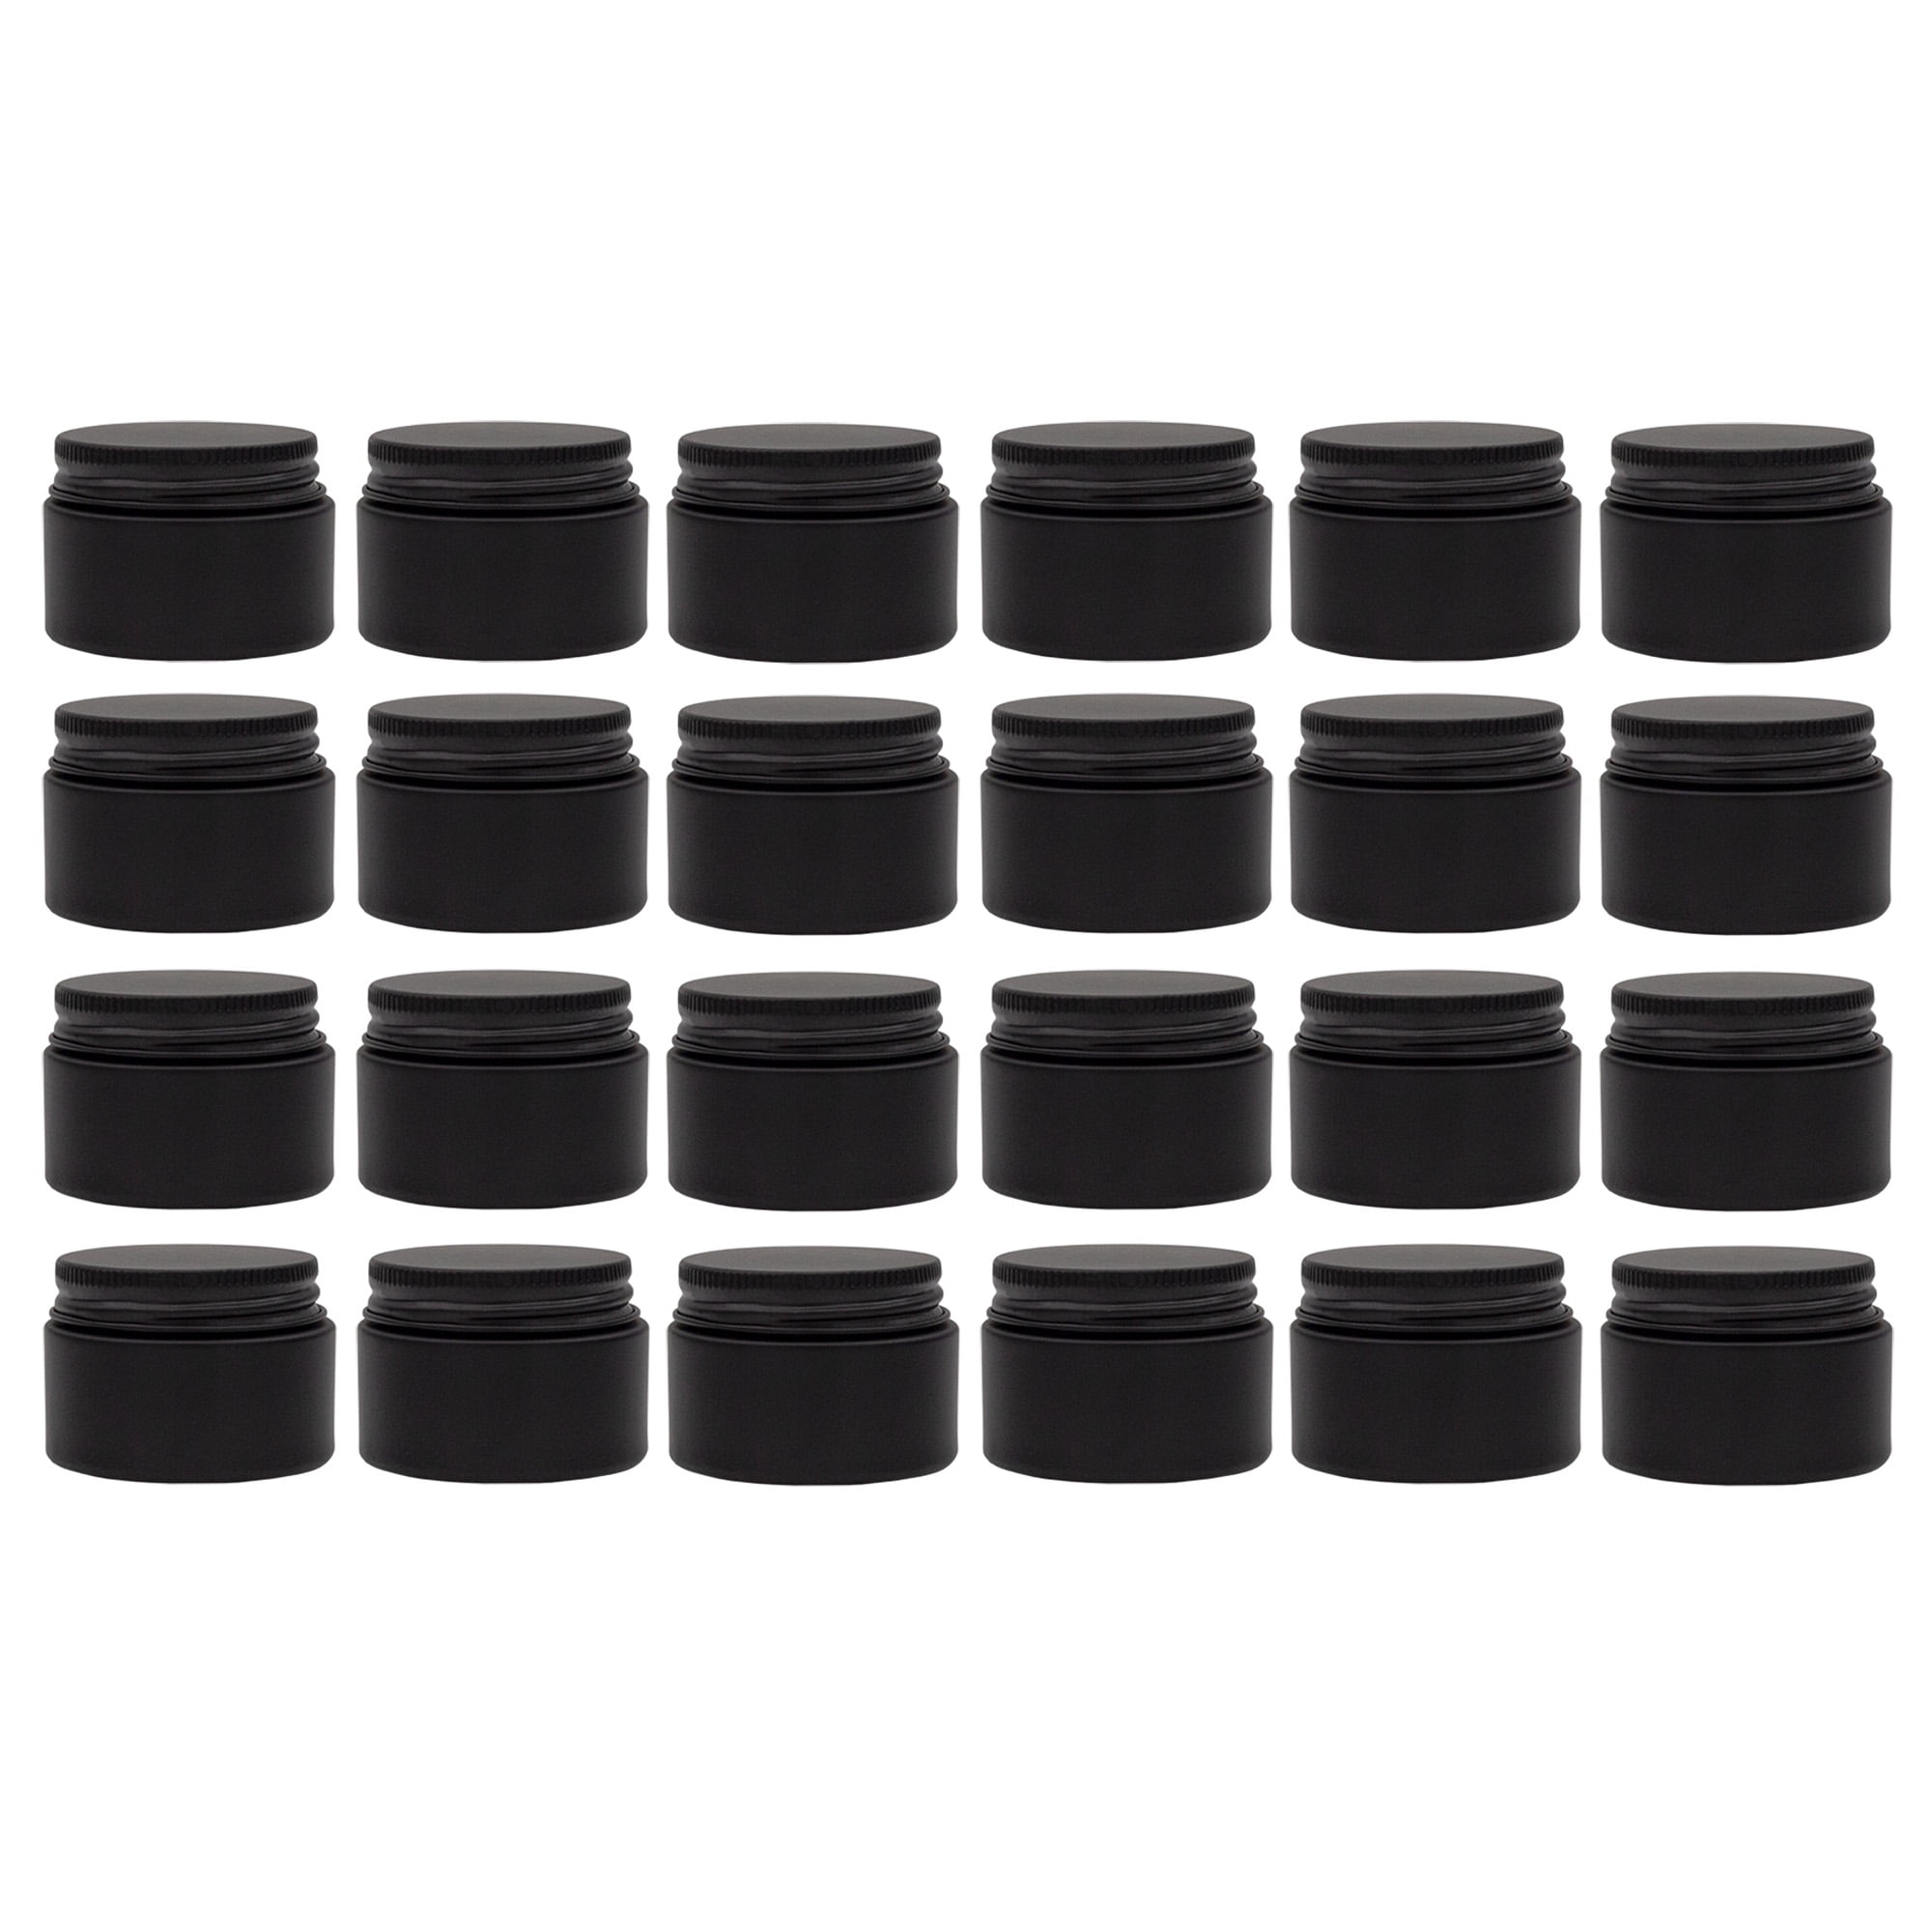 24 Pack Small Glass Containers with Lids 1 oz, Empty Jars with 6 Spatulas  for Creams, Cosmetics, DIY Ointments, Mixing (30ml)